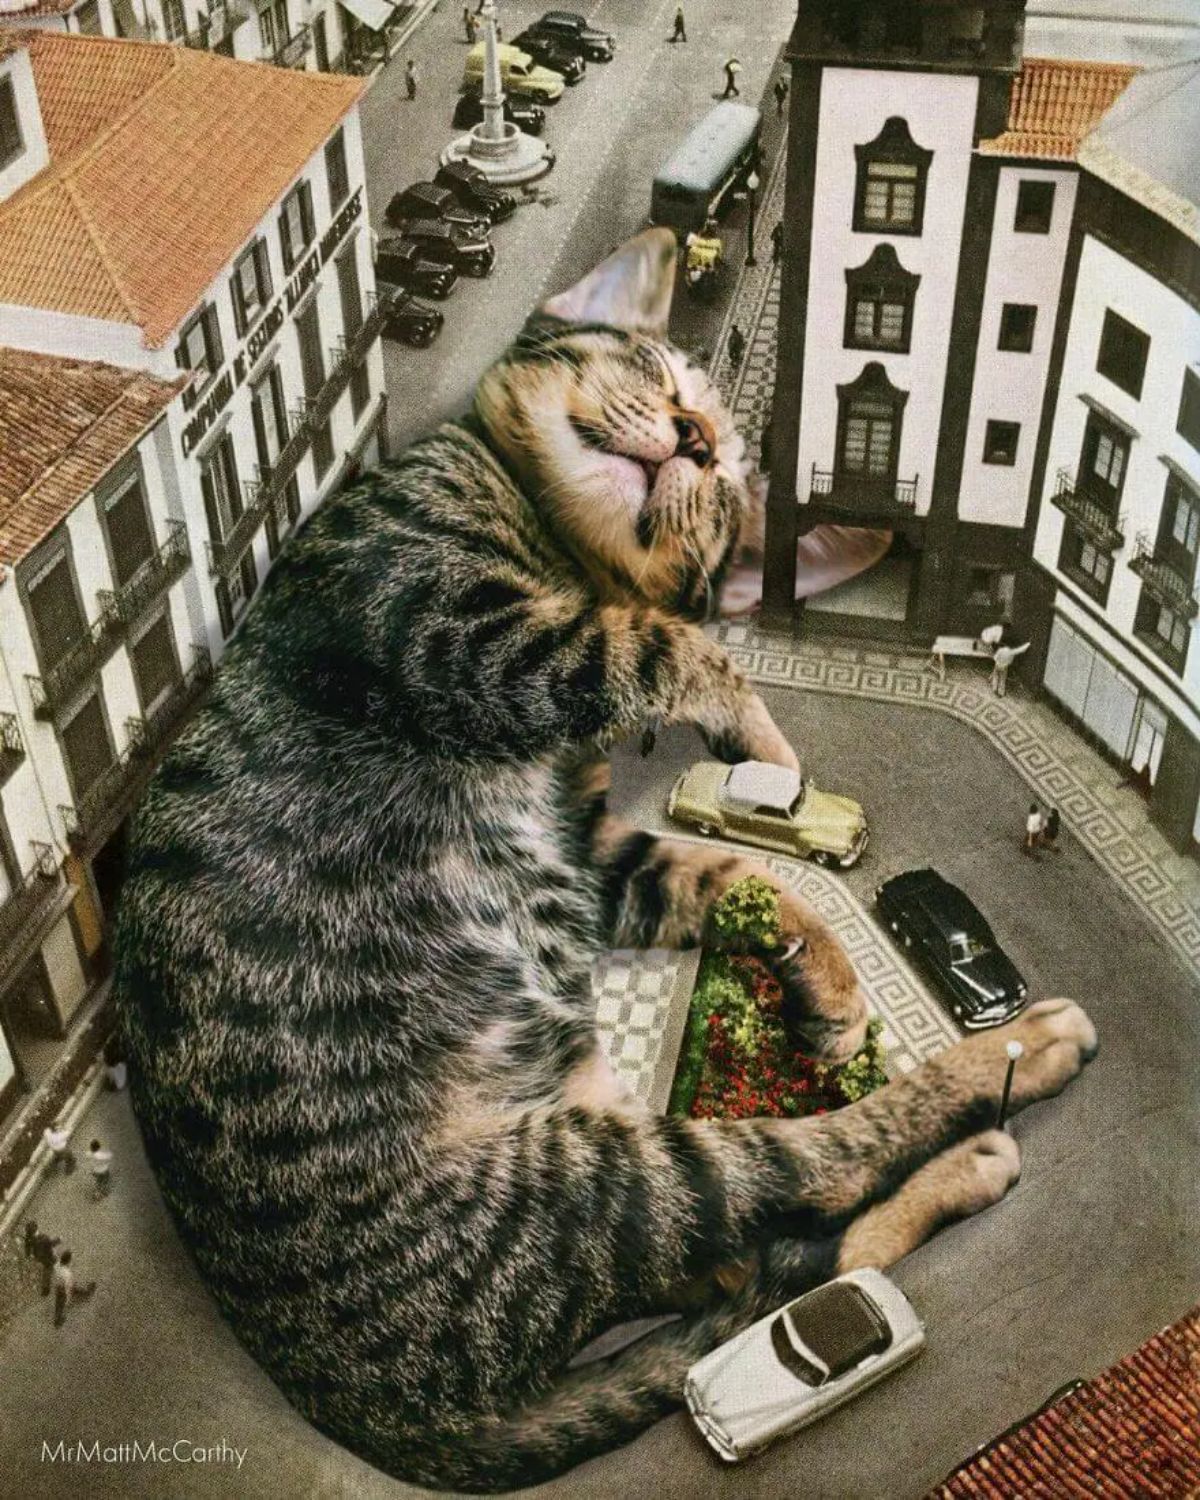 large photoshopped grey kitten sleeping sideways on a road with buildings and vehicles